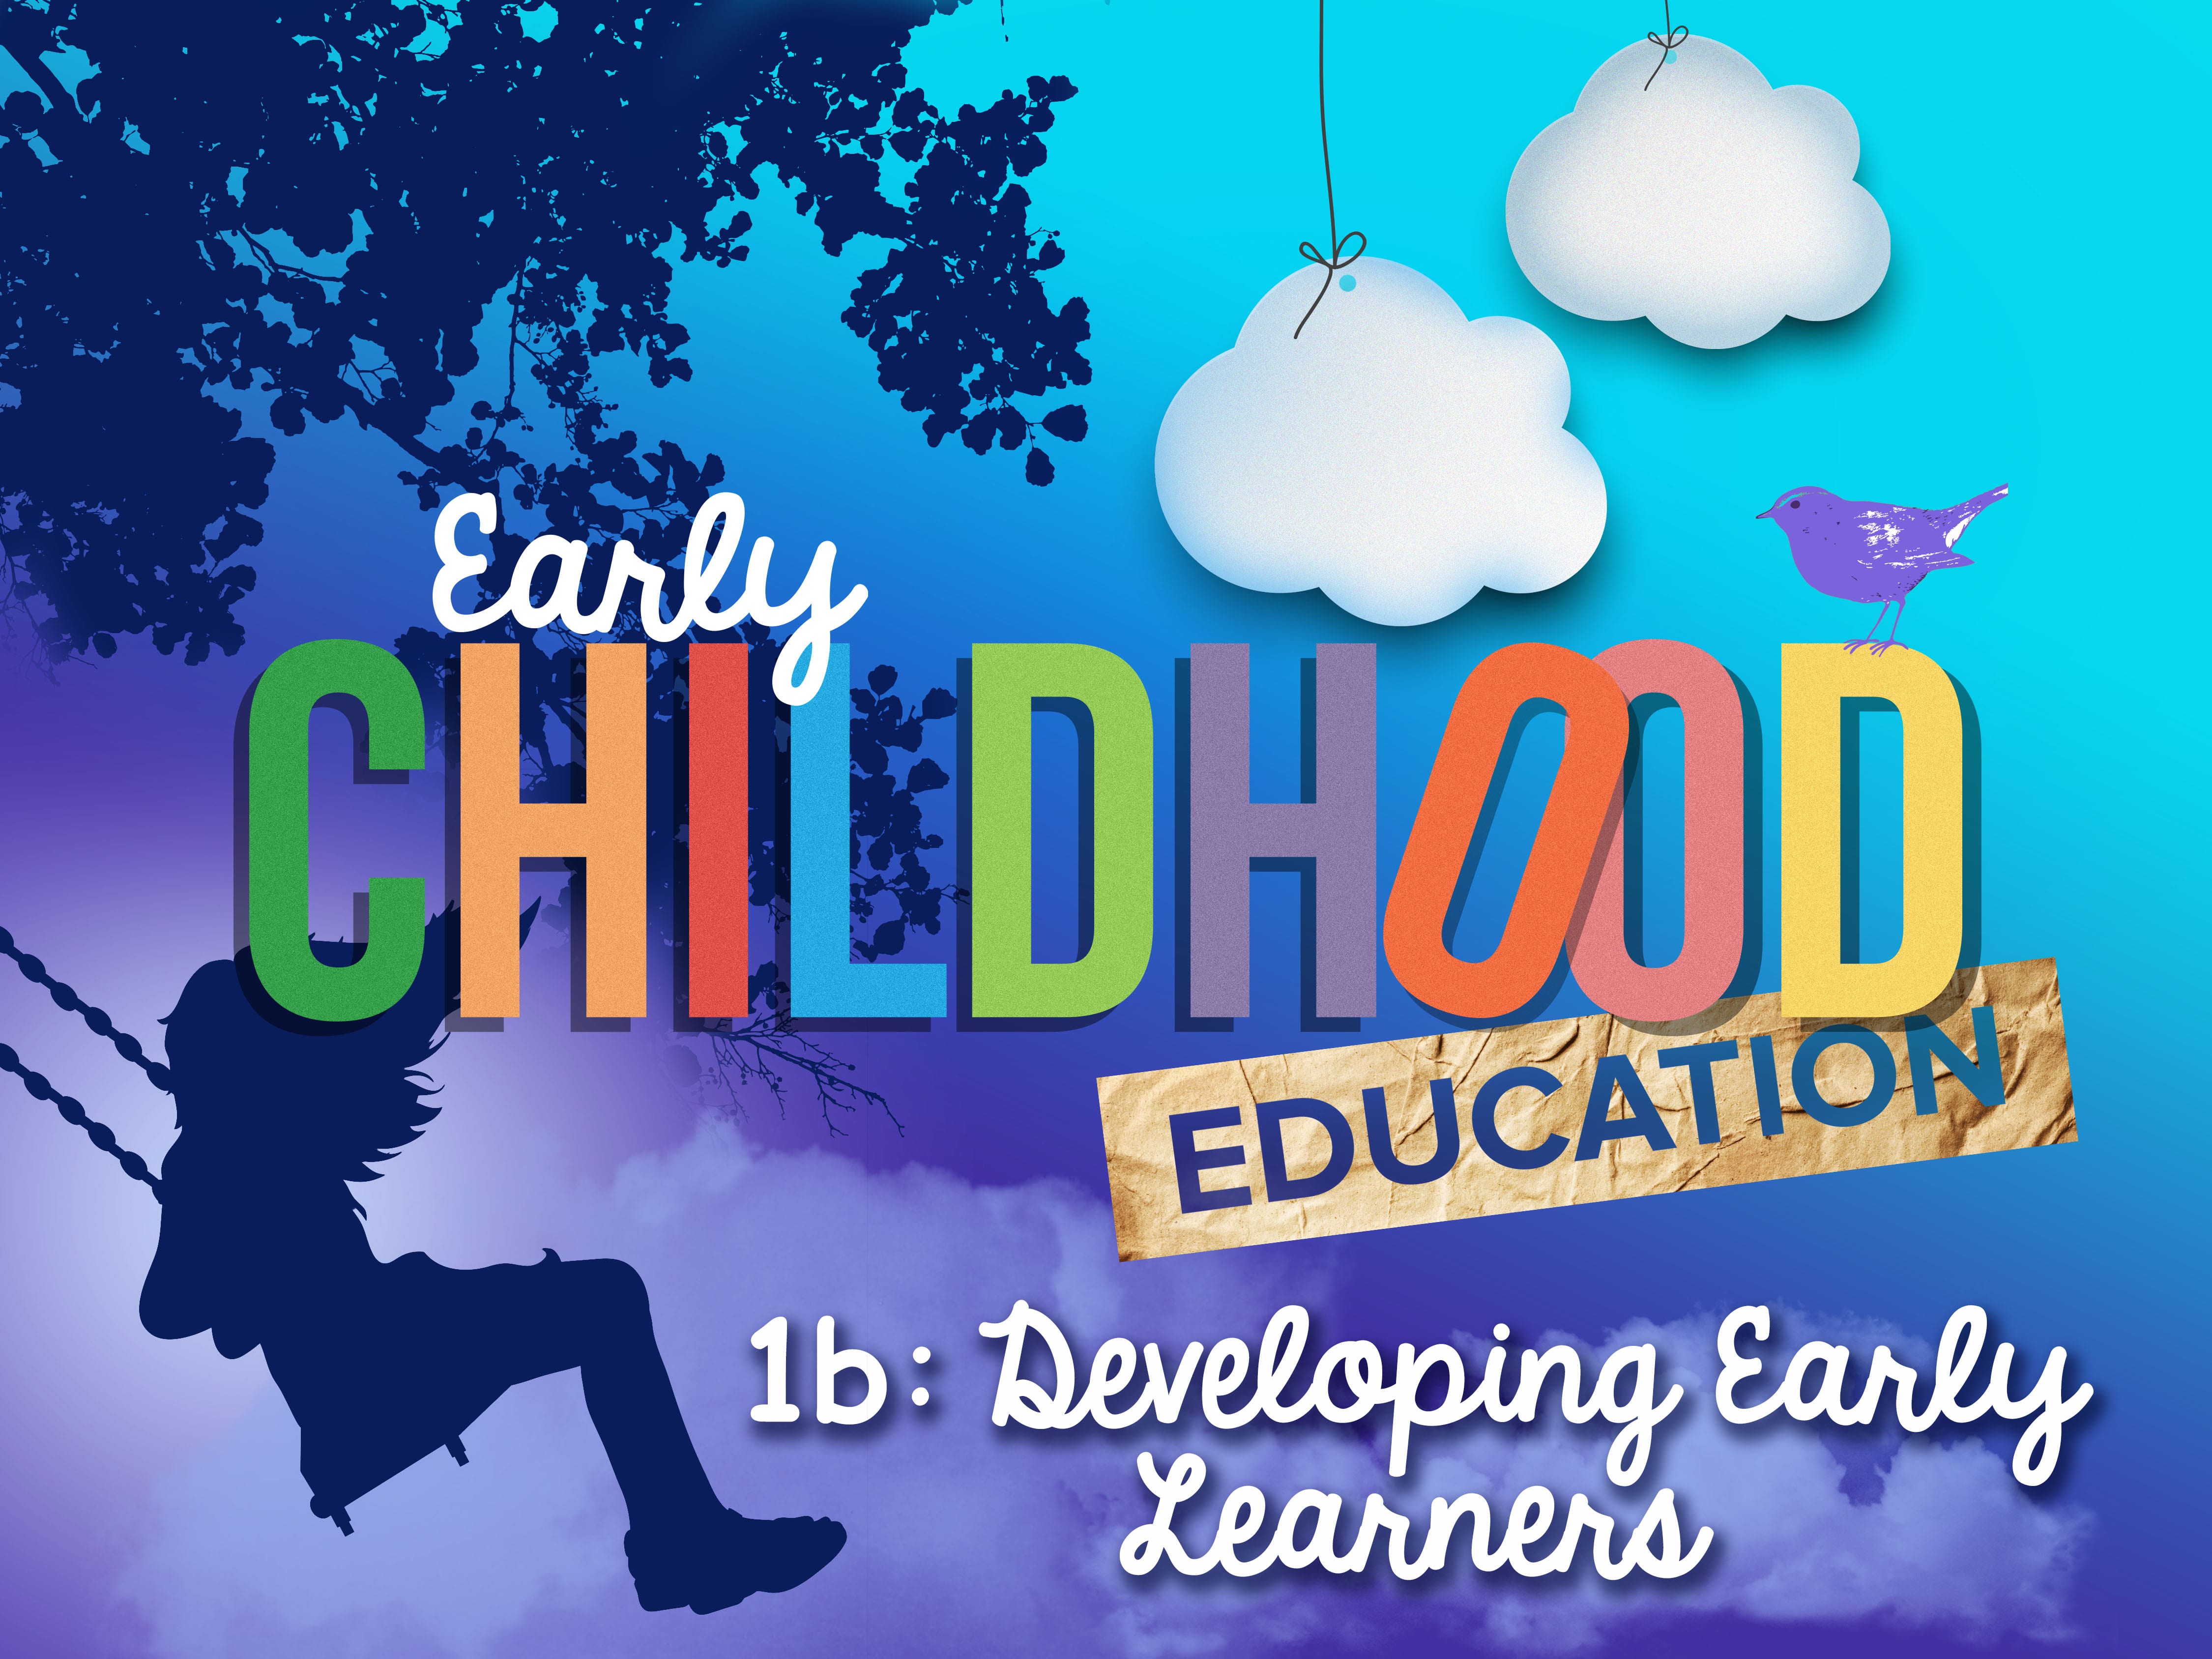 eDL CTE Course- Early Childhood Education 1b: Developing Early Learners